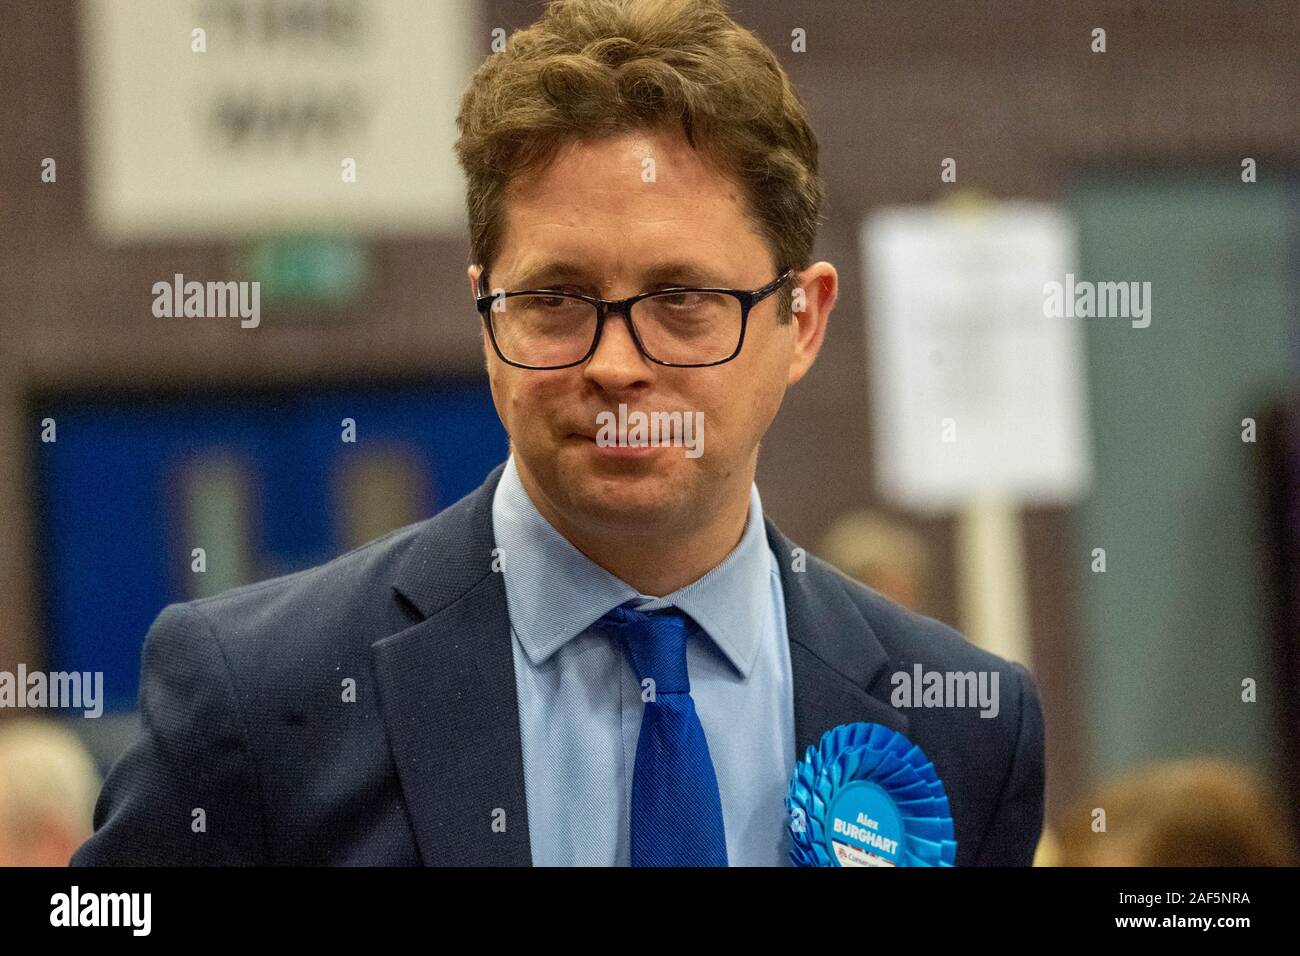 Brentood Essex 12th Dec. 2019 Election count at Brentwood for the constituency of Brentwood and Ongar Alex Burghart the newly elected MP for Brentwood and Ongar Credit: Ian Davidson/Alamy Live News Stock Photo